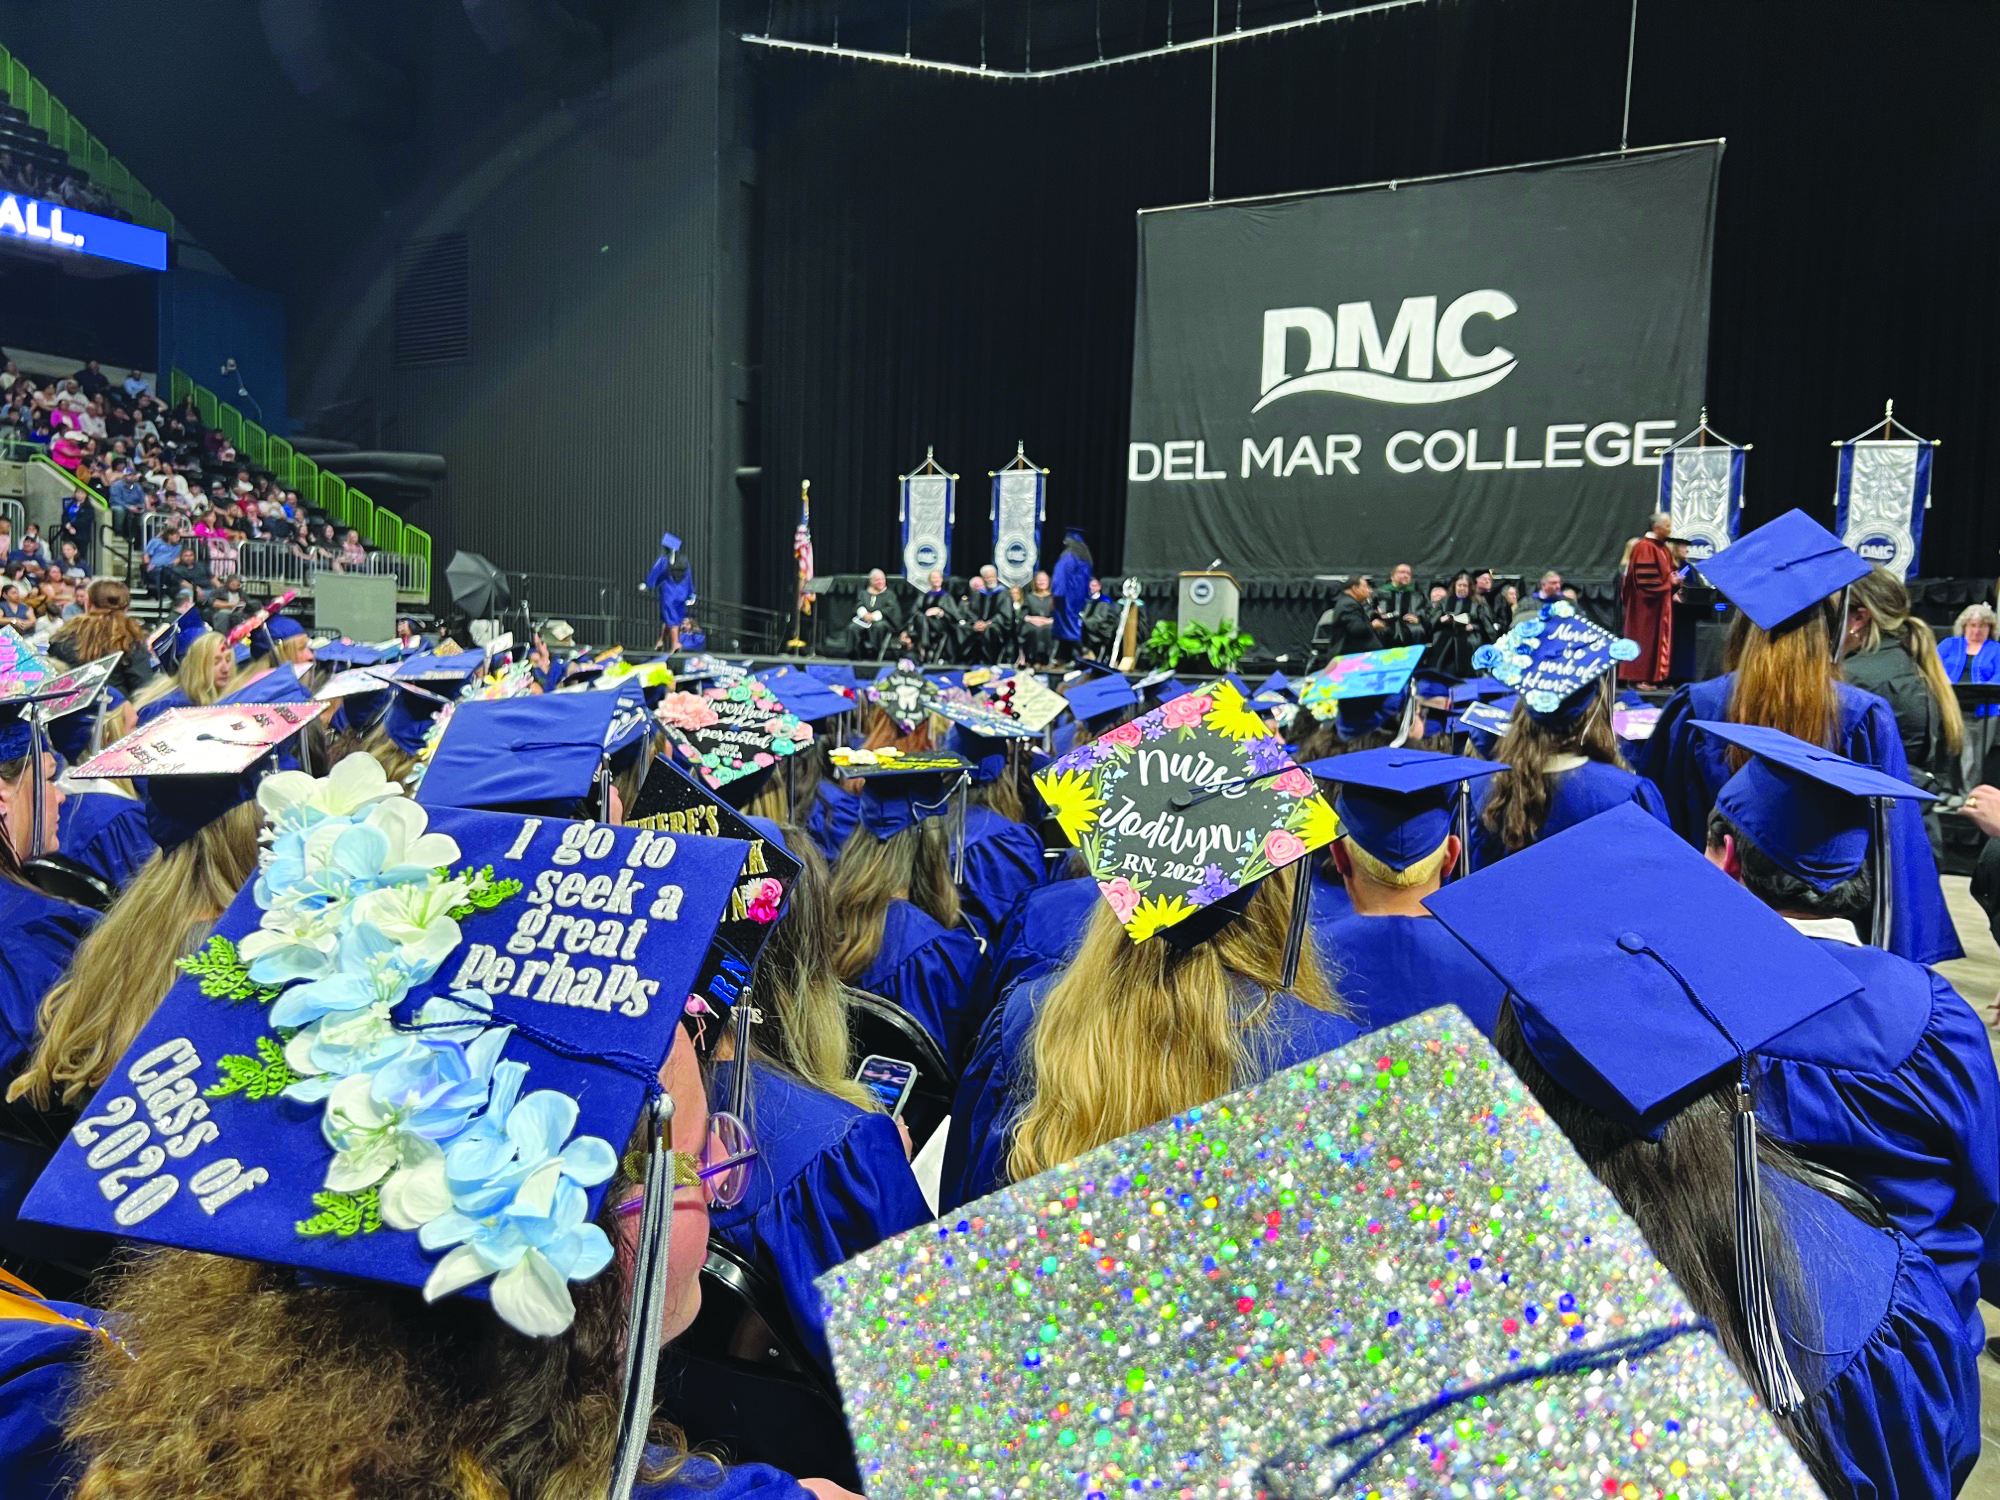 Doctor of Toxicology, DMC Alumnus to give keynote address at May 19 commencement ceremony